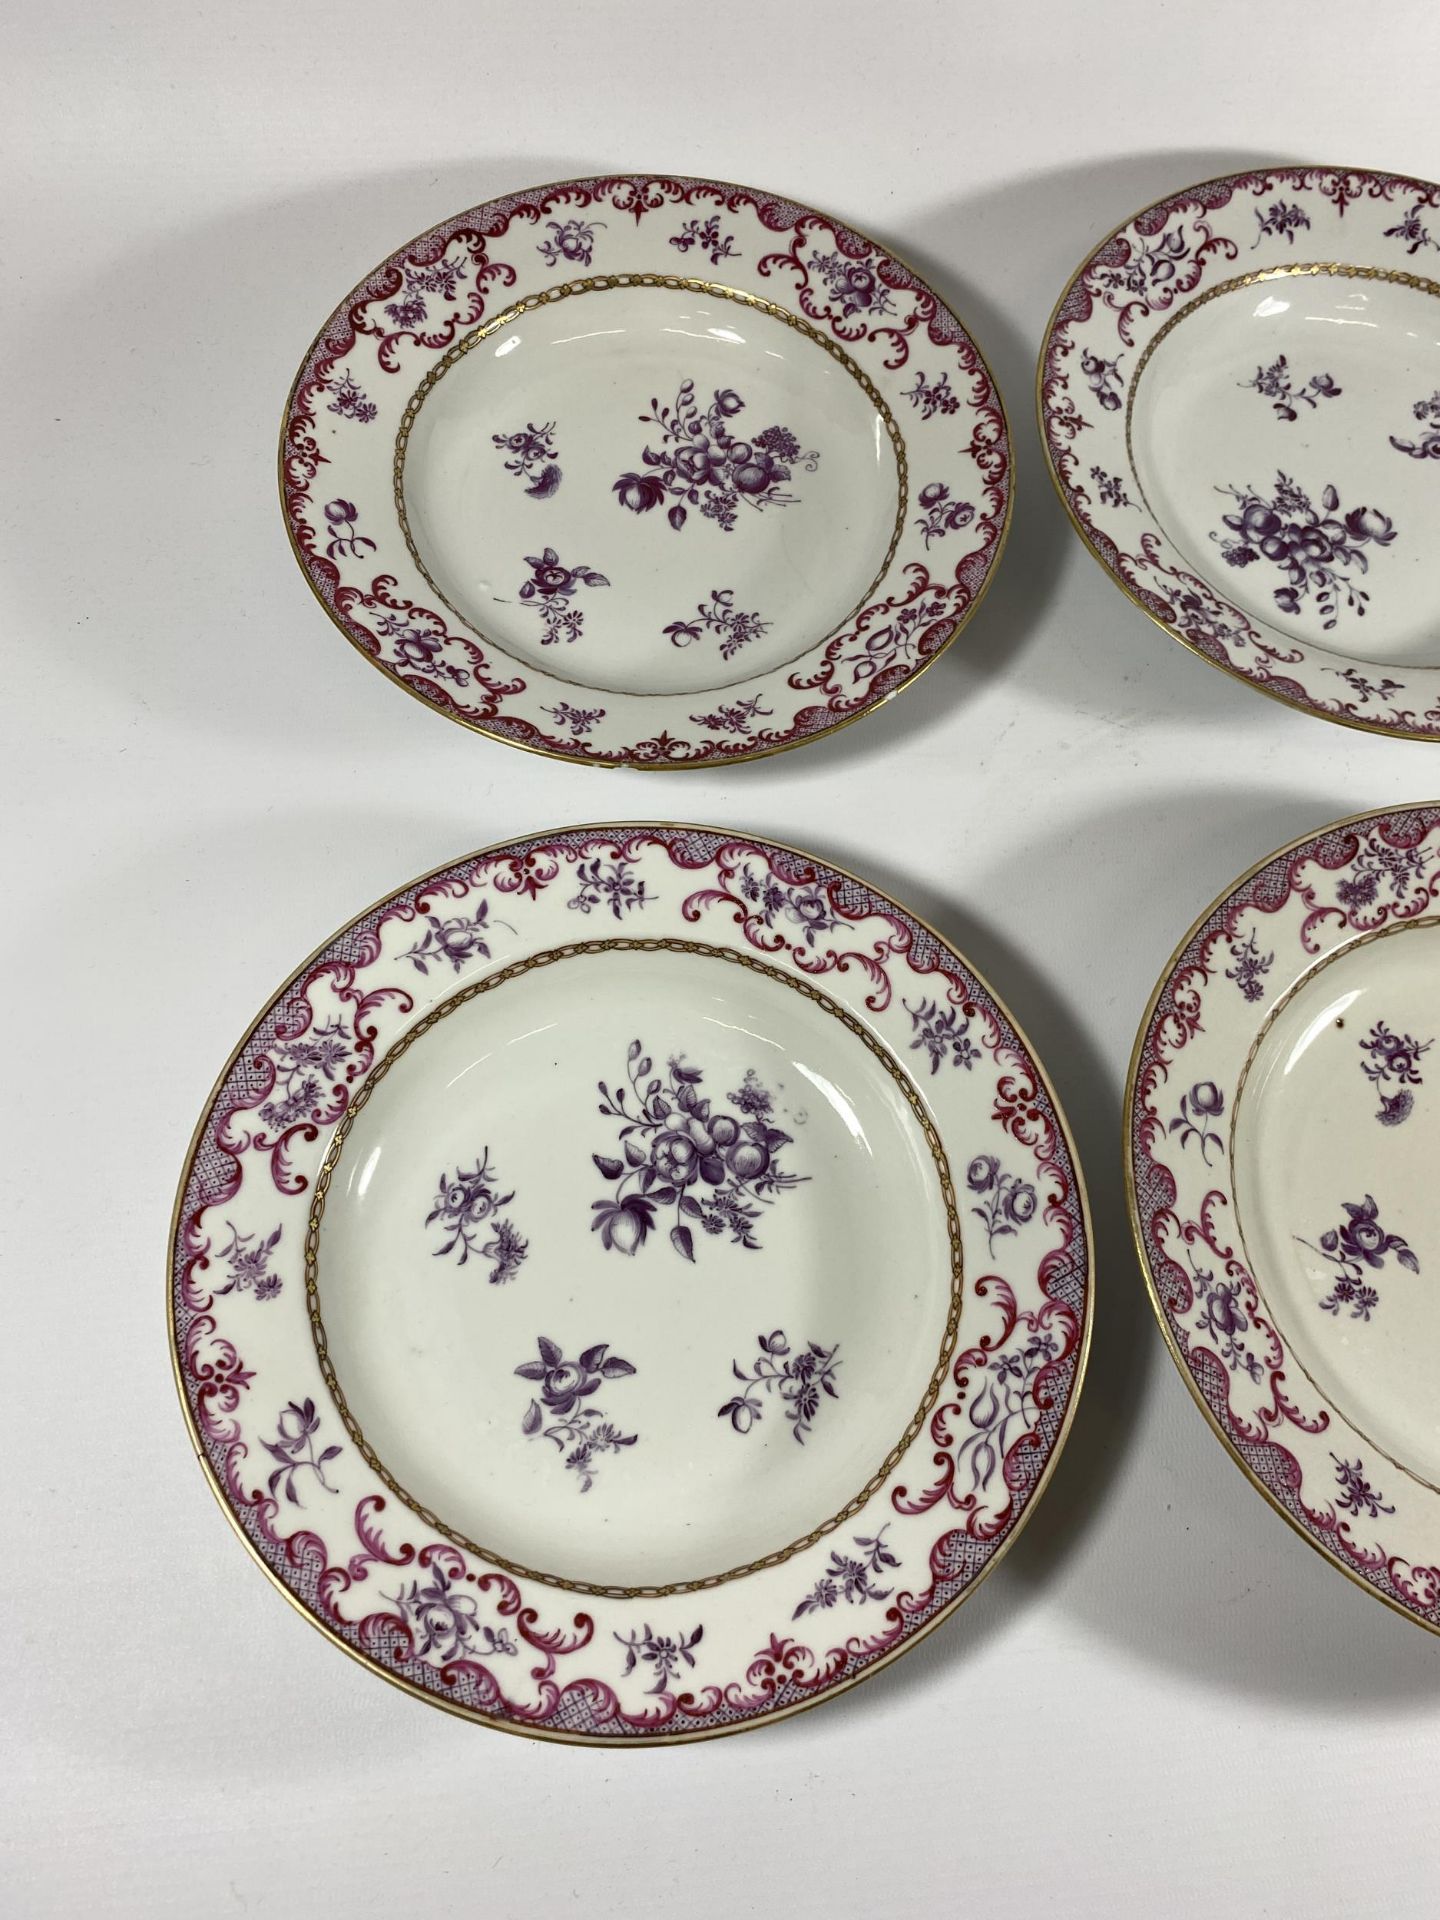 A SET OF SIX EARLY-MID 19TH CENTURY PORCELAIN HAND PAINTED DISHES, UNMARKED, DIAMETER 23CM - Image 2 of 5